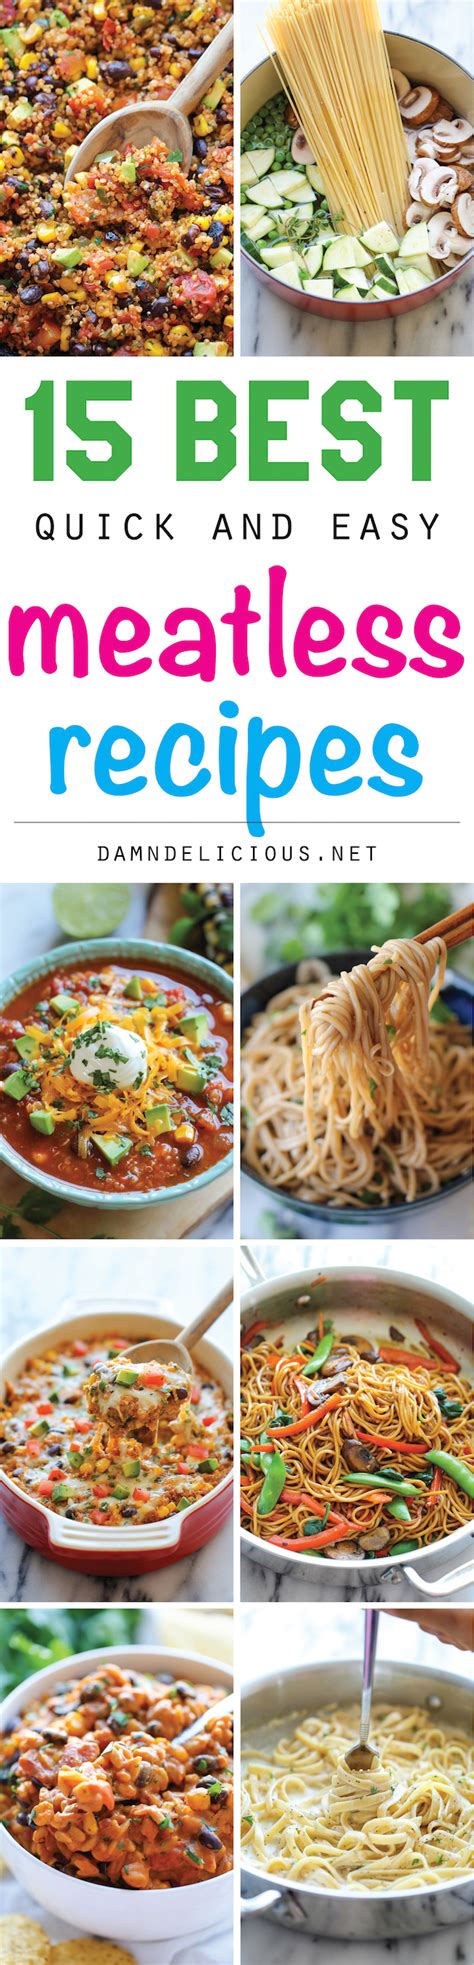 15 Best Quick And Easy Meatless Recipes Damn Delicious